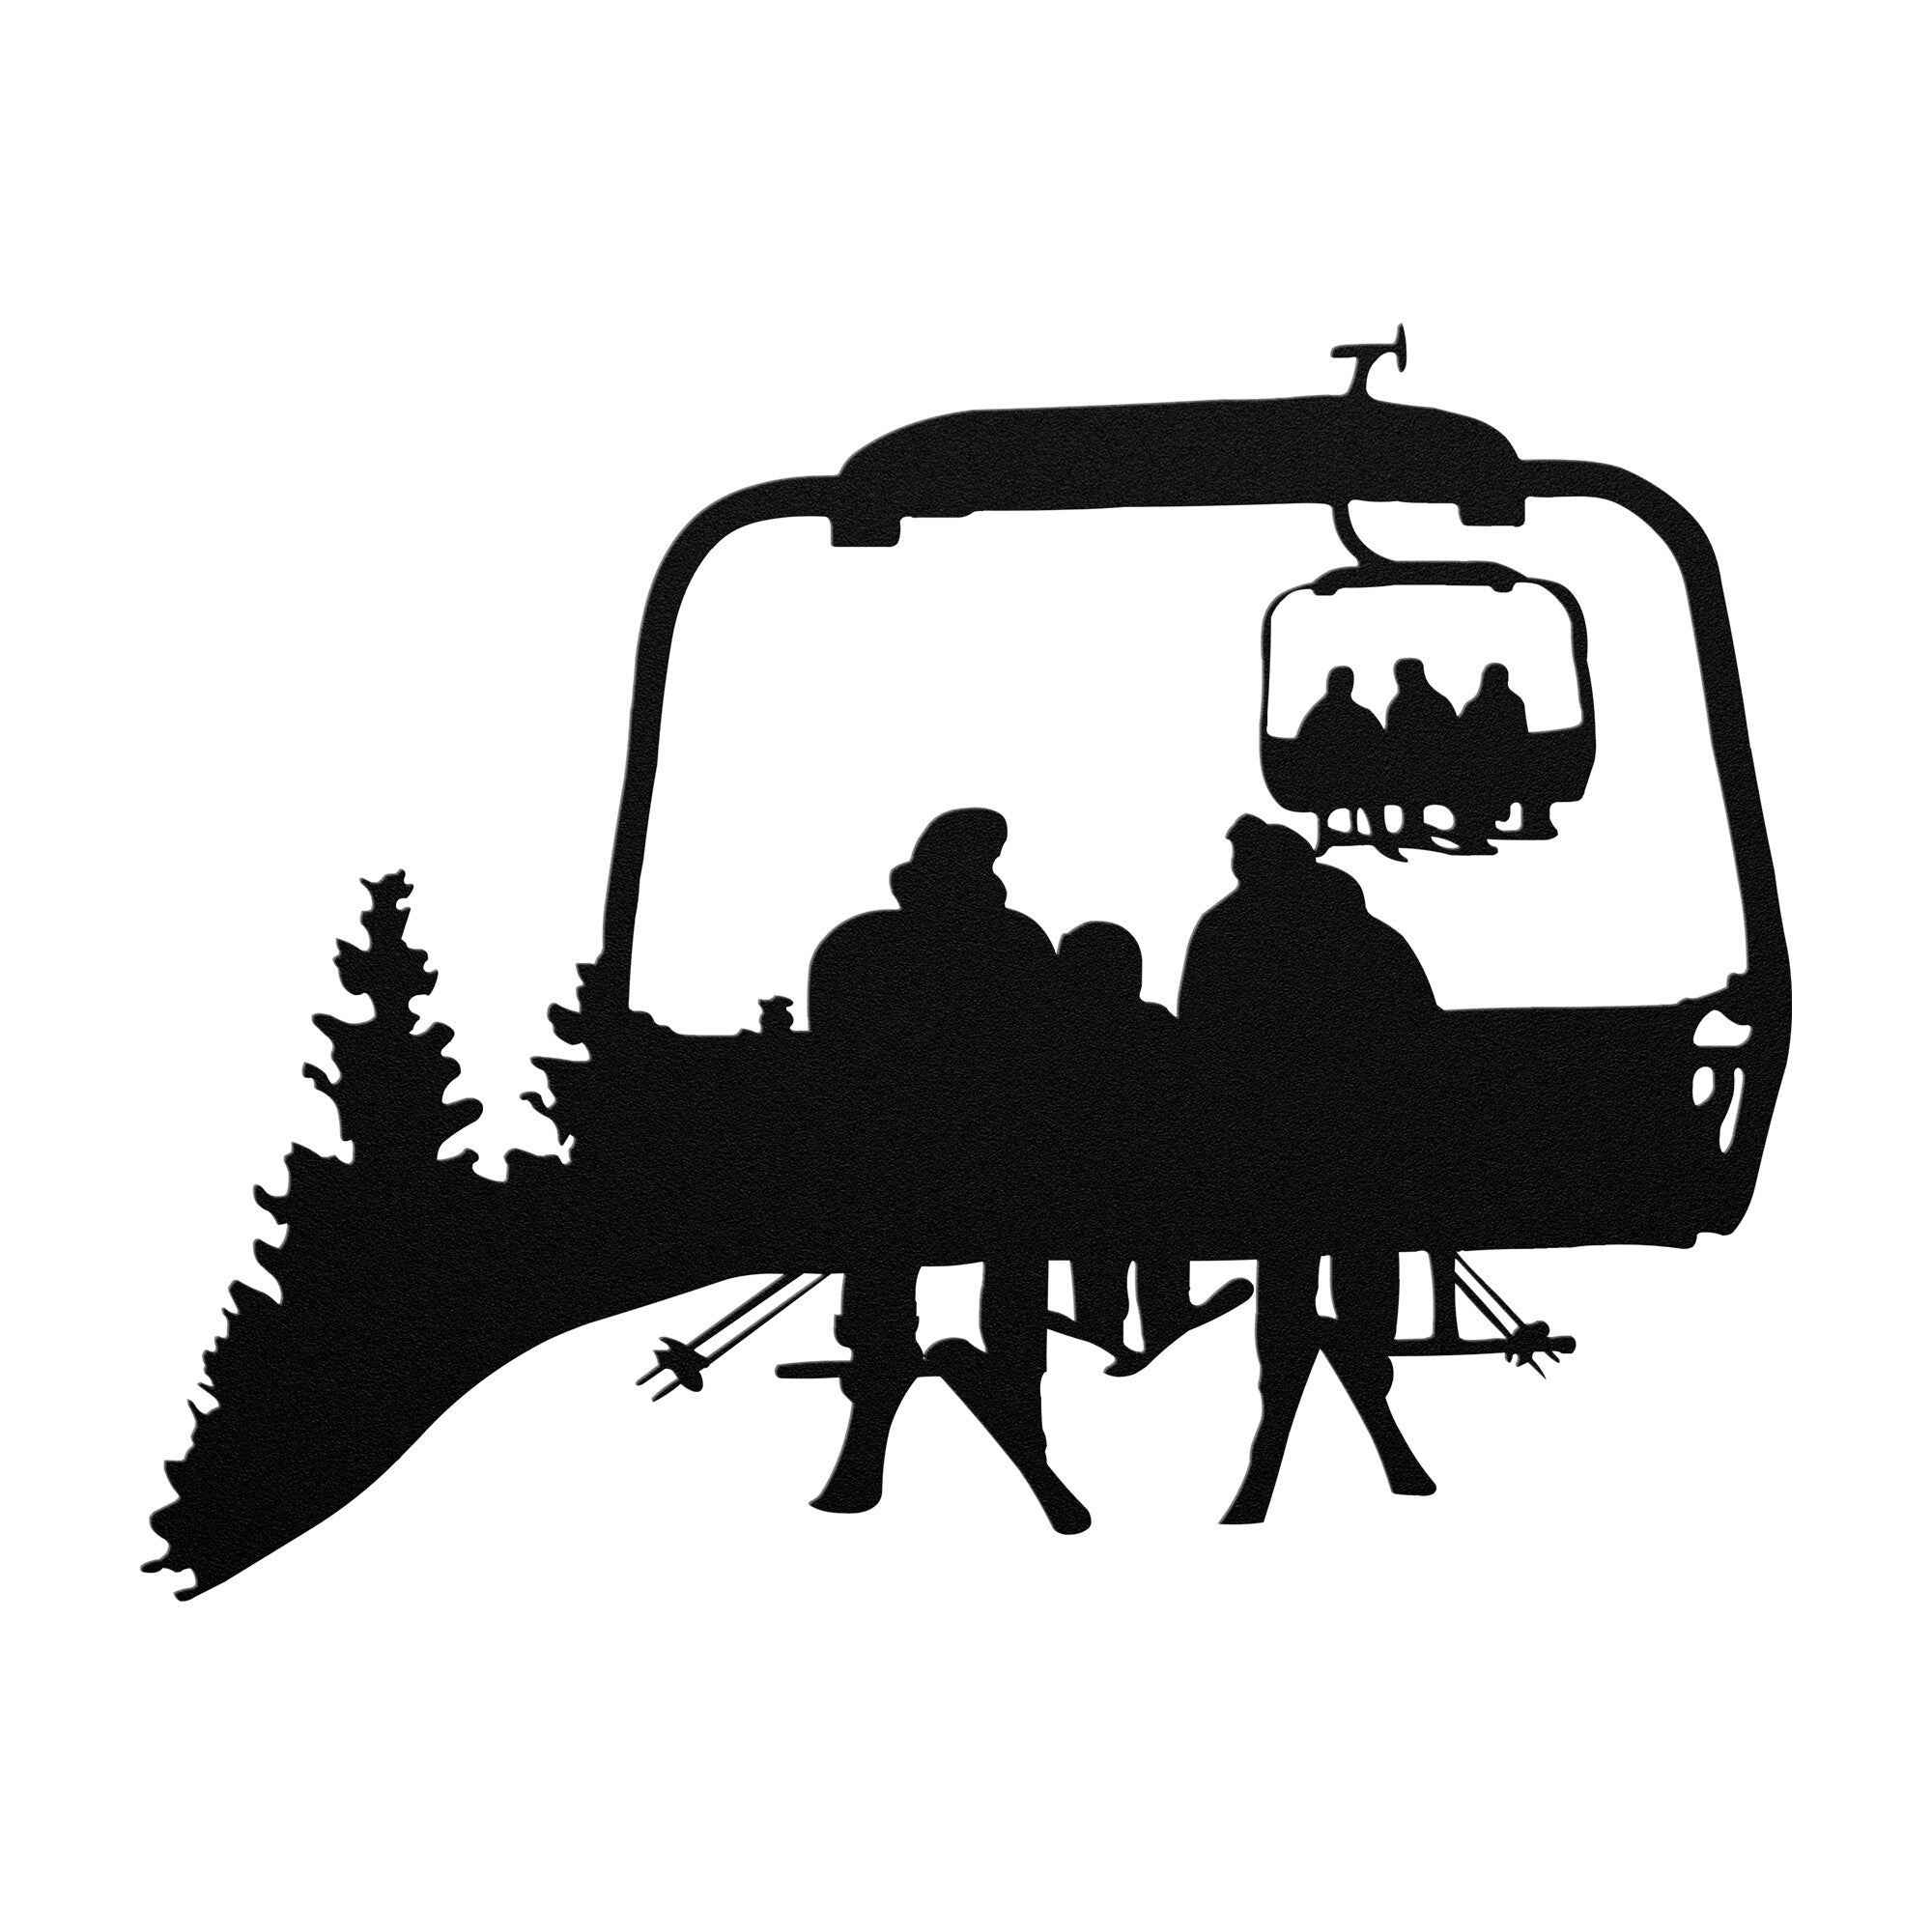 PERSONALIZED CHAIRLIFT SKIING FAMILY METAL WALL ART, 2 SKIING PARENTS, 1 SKIING CHILD (🇺🇸 MADE IN THE USA)